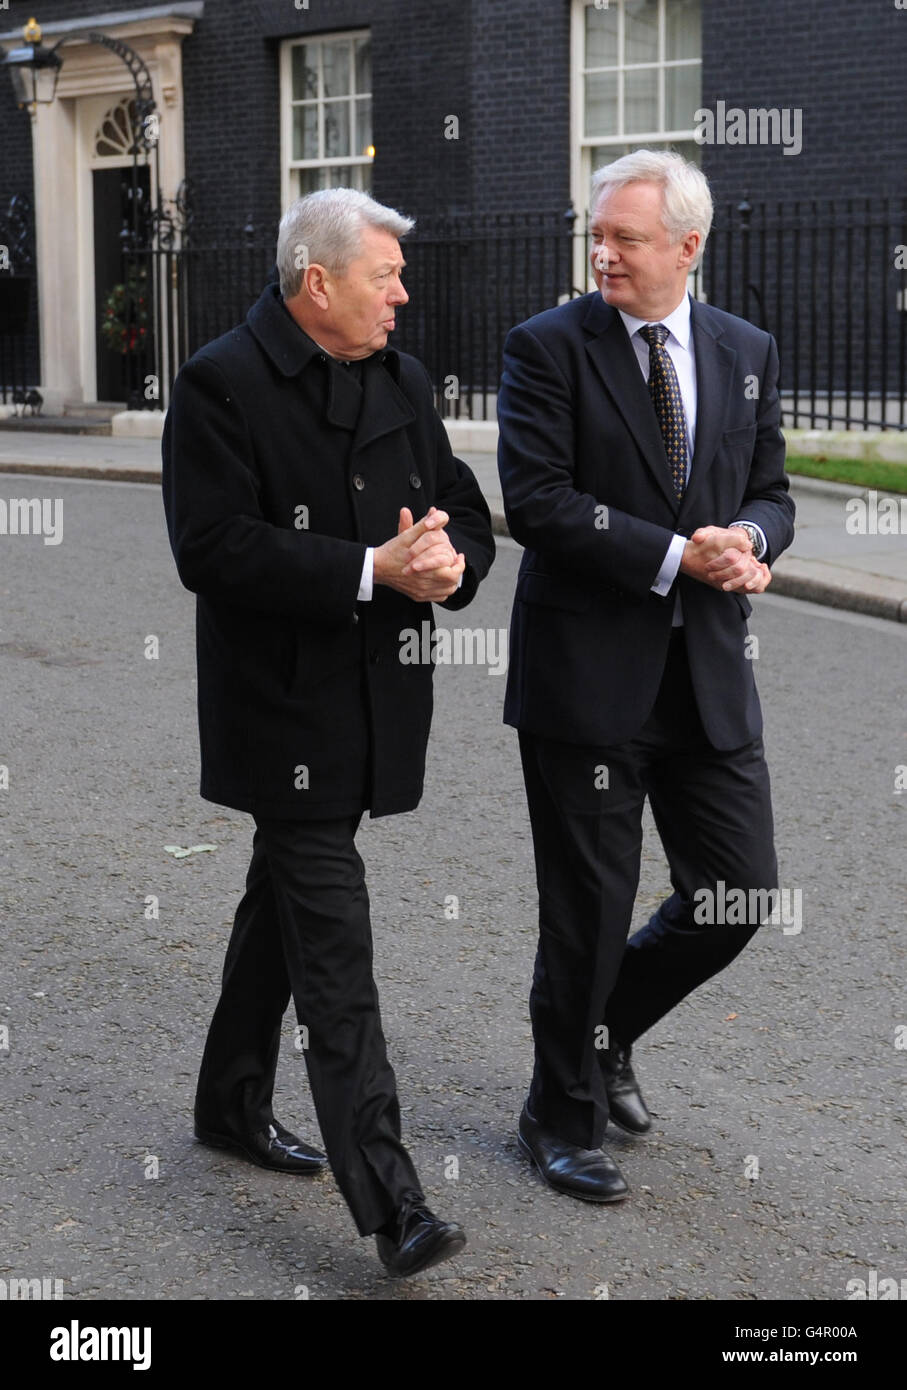 MPs Alan Johnson (left) and David Davis (right) after they handed a petition in at 10 Downing Street, London, with workers and family members from BAE Systems Brough factory in an attempt to halt the planned closure of the plant near Hull. PRESS ASSOCIATION Photo. Picture date: Wednesday December 14, 2011. See PA story INDUSTRY Lobby. Photo credit should read: Stefan Rousseau/PA Wire Stock Photo